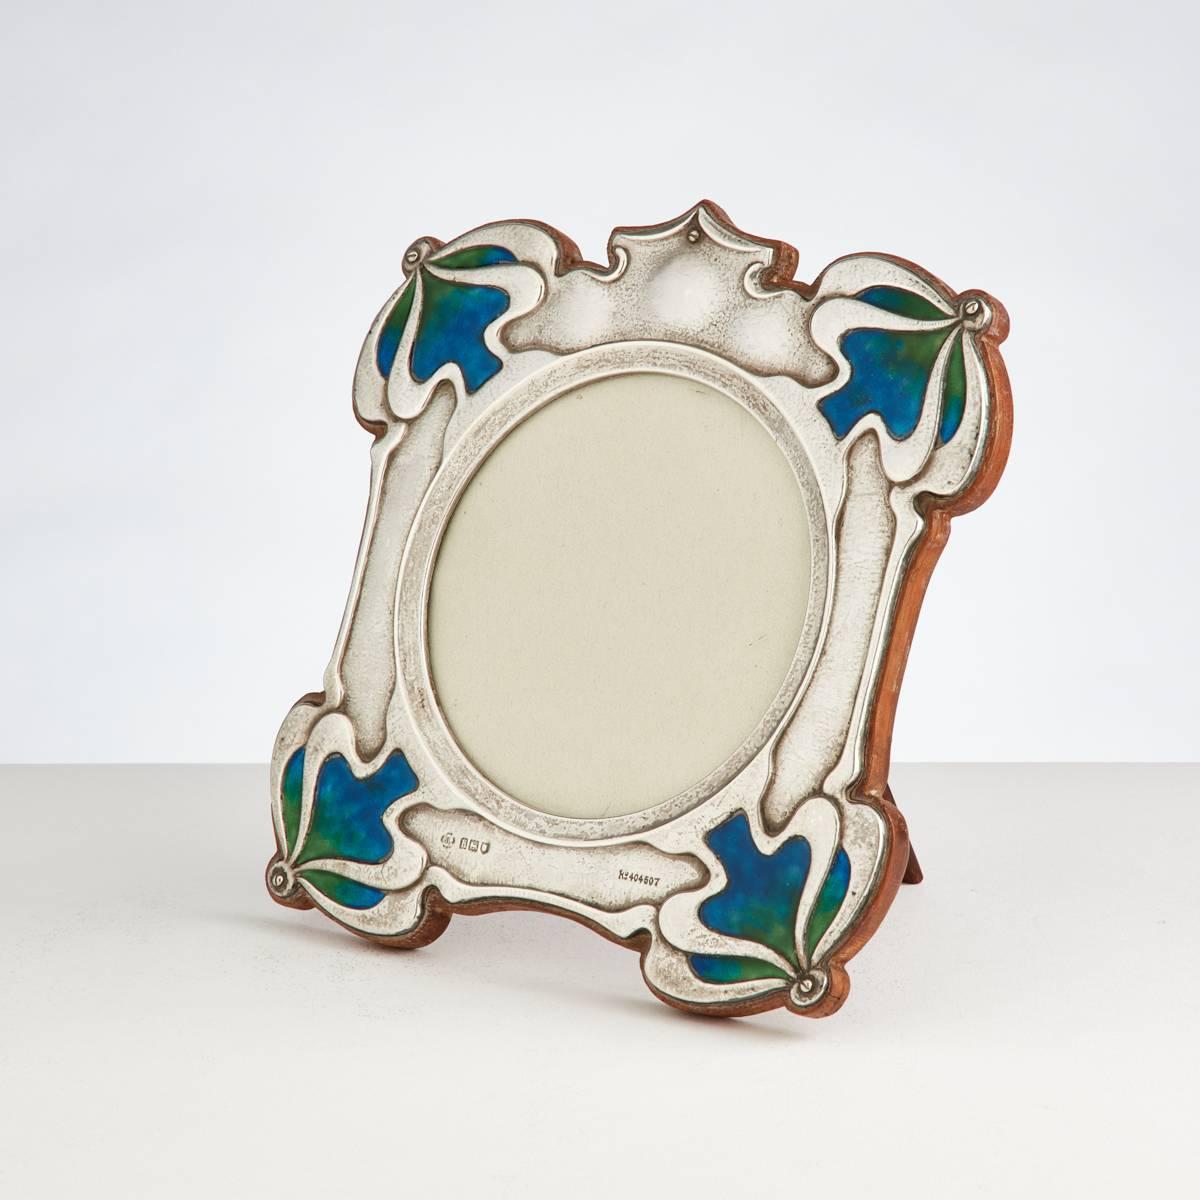 A beautiful quality Art Nouveau silver and enamel photograph frame by William Hutton with registration marks and dated London, 1906.
The vibrant enamel is in perfect condition and it retains its original shaped oak back.
The circular opening is 4